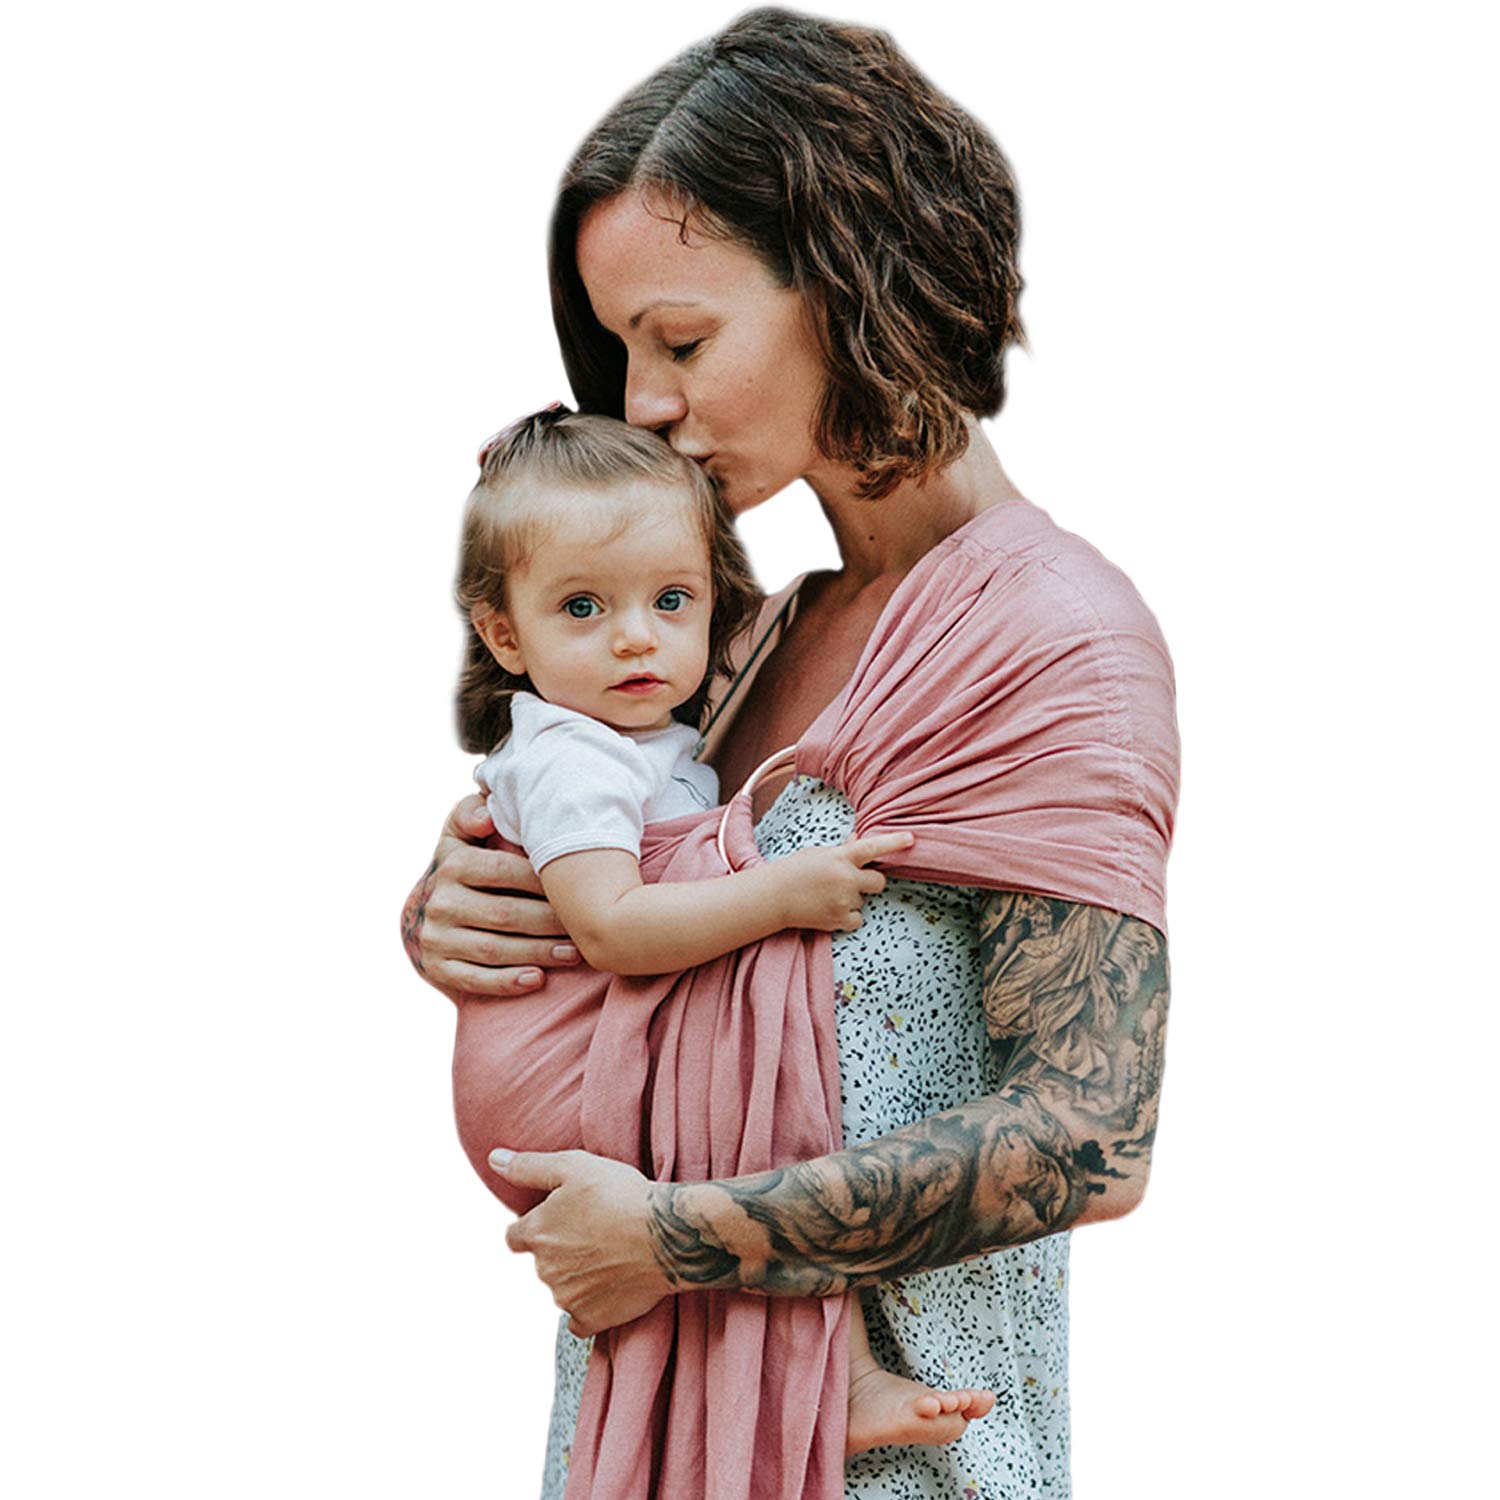 Luxury Baby Sling with Rings Extra Soft Bamboo and Linen Fabric Full Support and Comfort for Newborns, Infants and Toddlers Ideal Gift for Baby Shower - Men